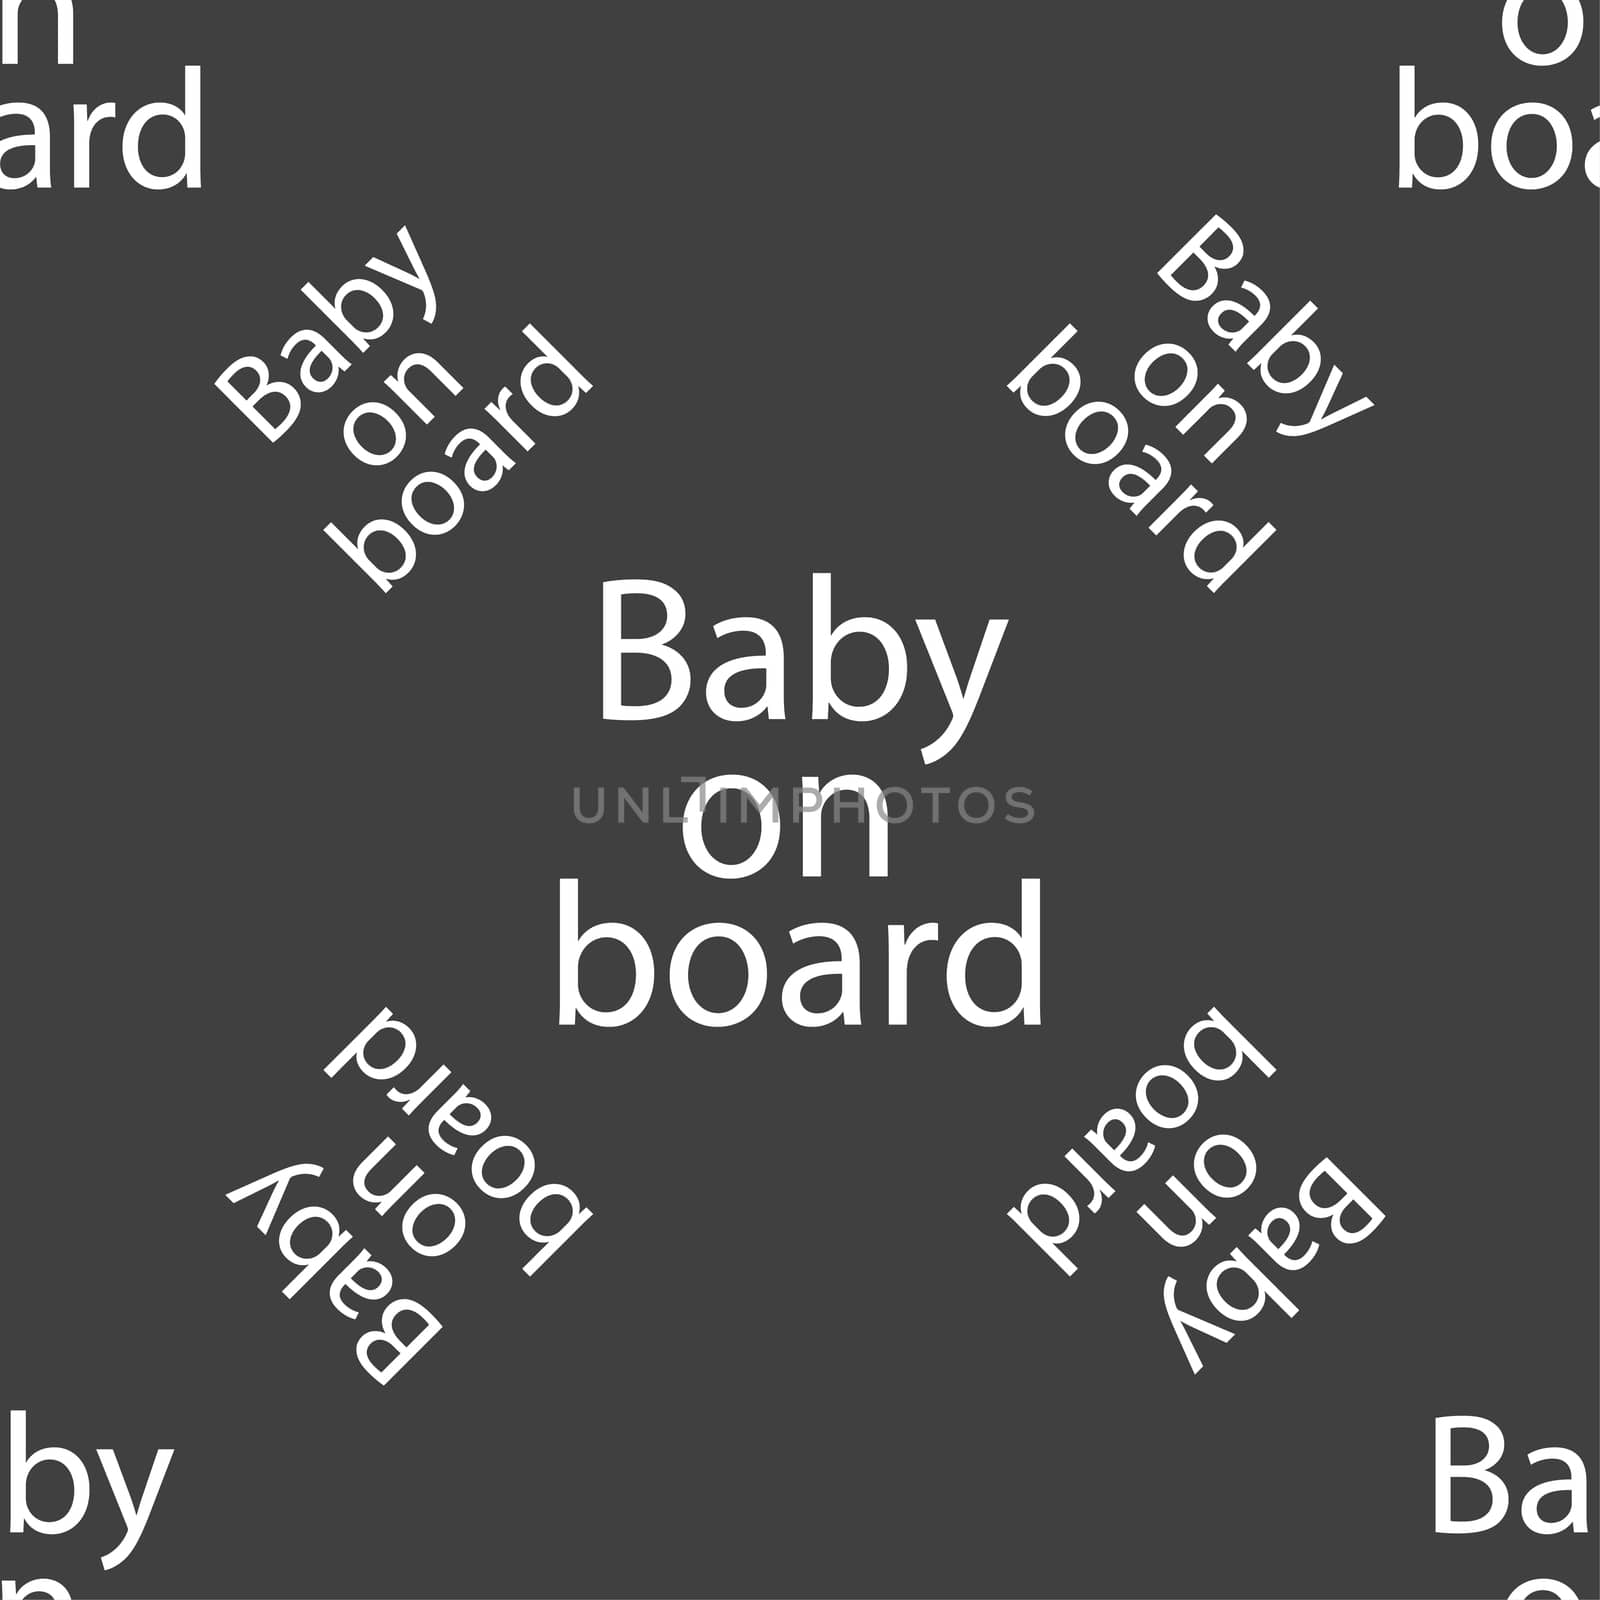 Baby on board sign icon. Infant in car caution symbol. Seamless pattern on a gray background. illustration